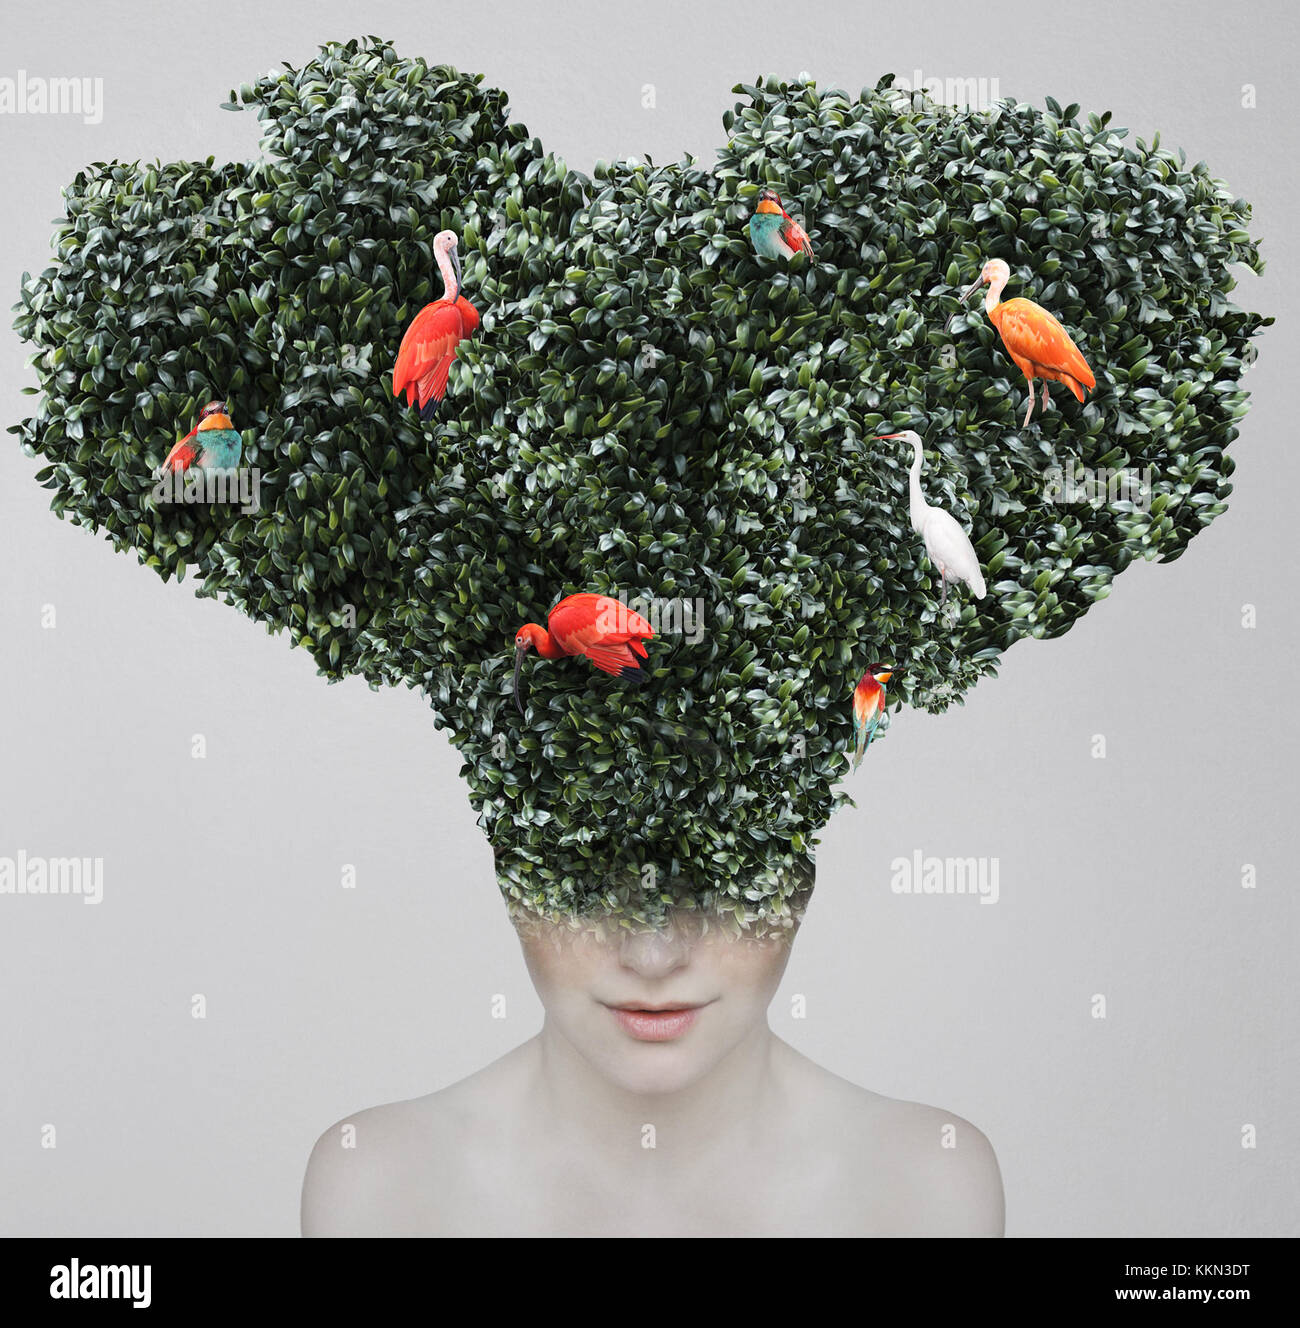 Artistic surreal portrait of a girl with a huge headgear of foliage and colorful birds on it isolated on light grey background Stock Photo